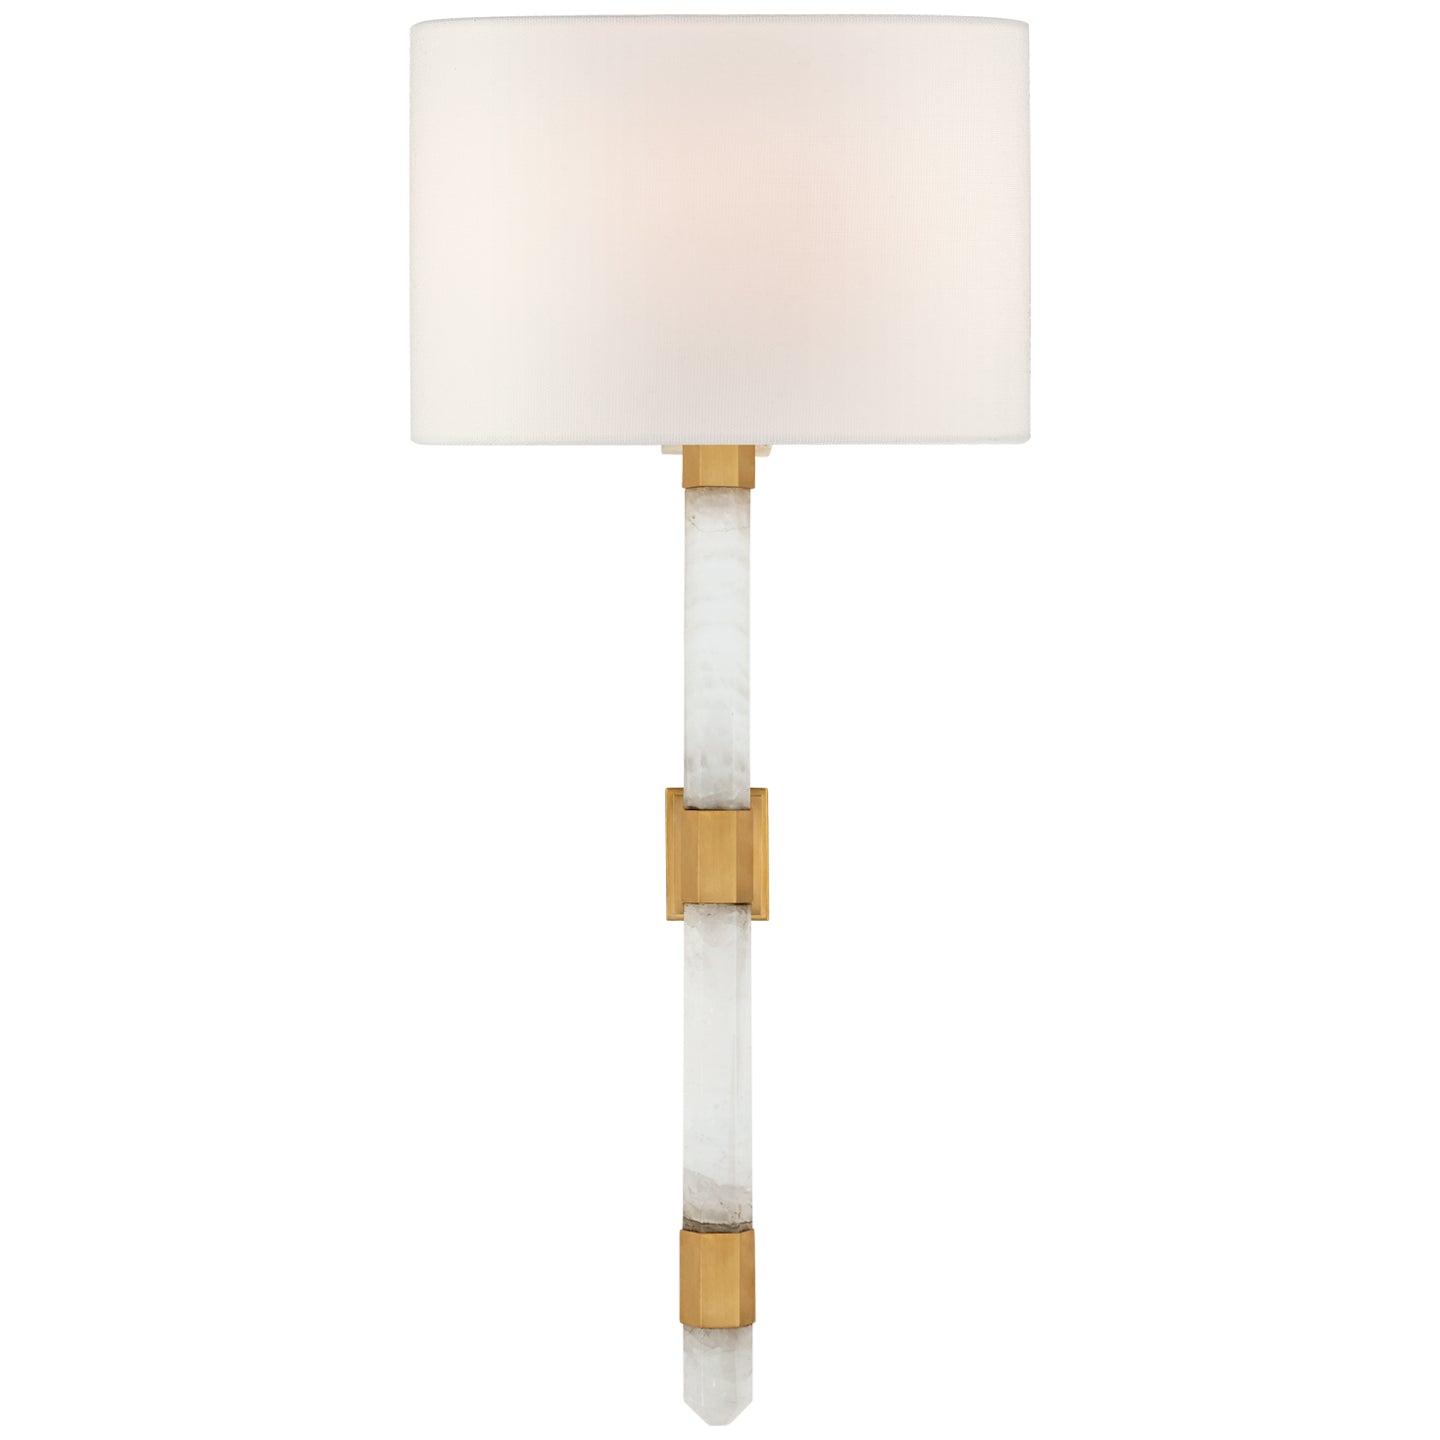 Visual Comfort Signature - SK 2904AB/Q-L - One Light Wall Sconce - Adaline - Antique-Burnished Brass